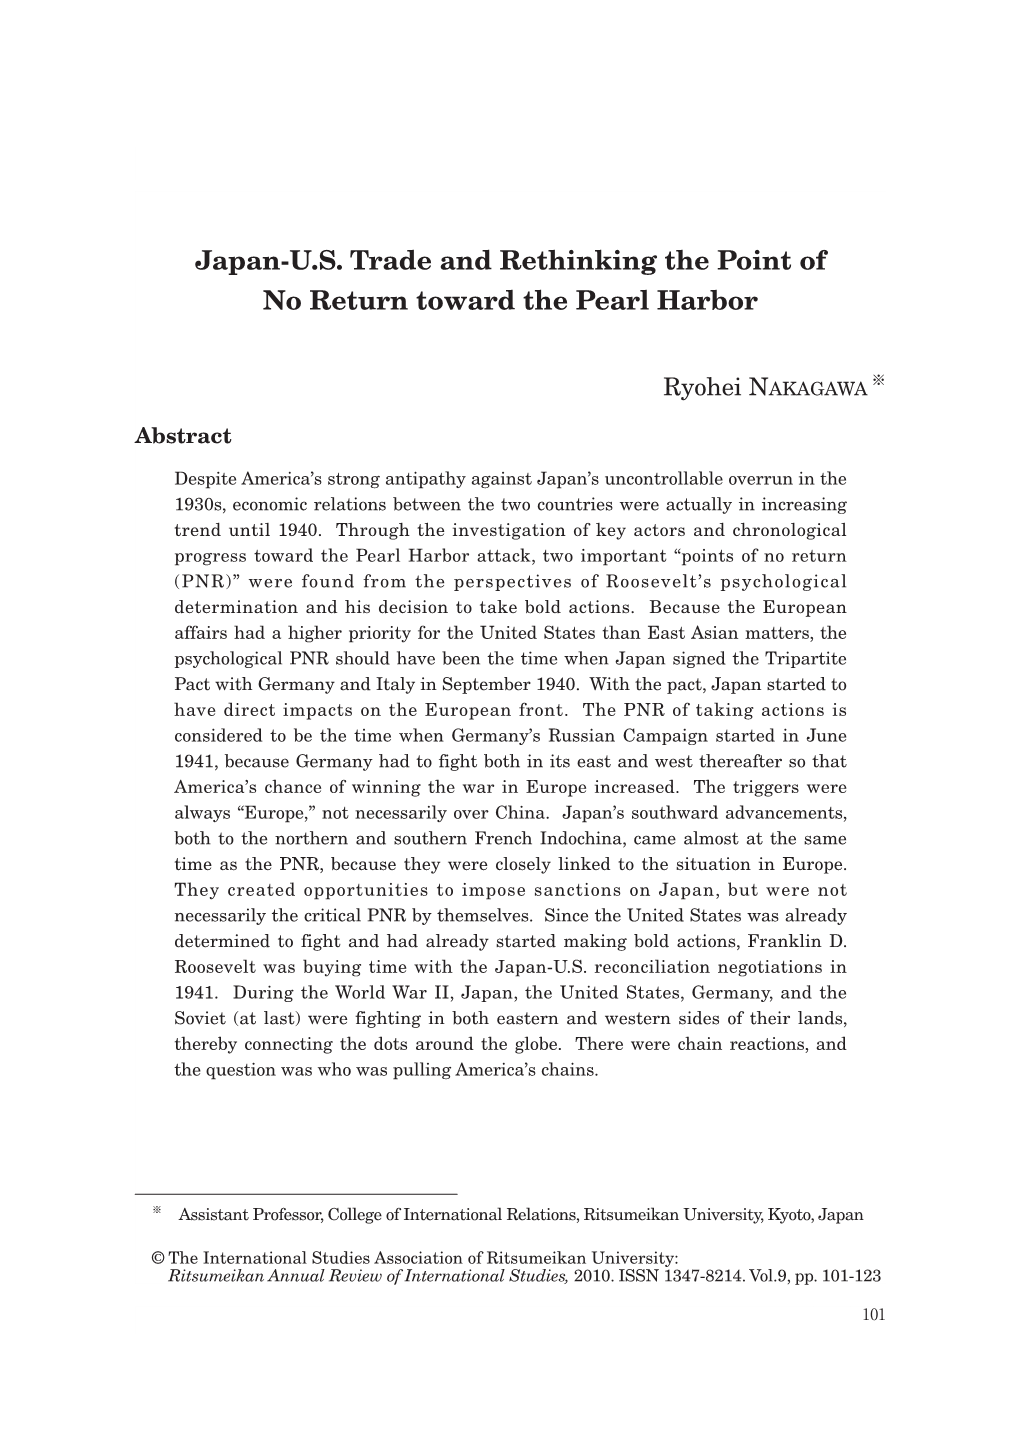 Japan-U.S. Trade and Rethinking the Point of No Return Toward the Pearl Harbor